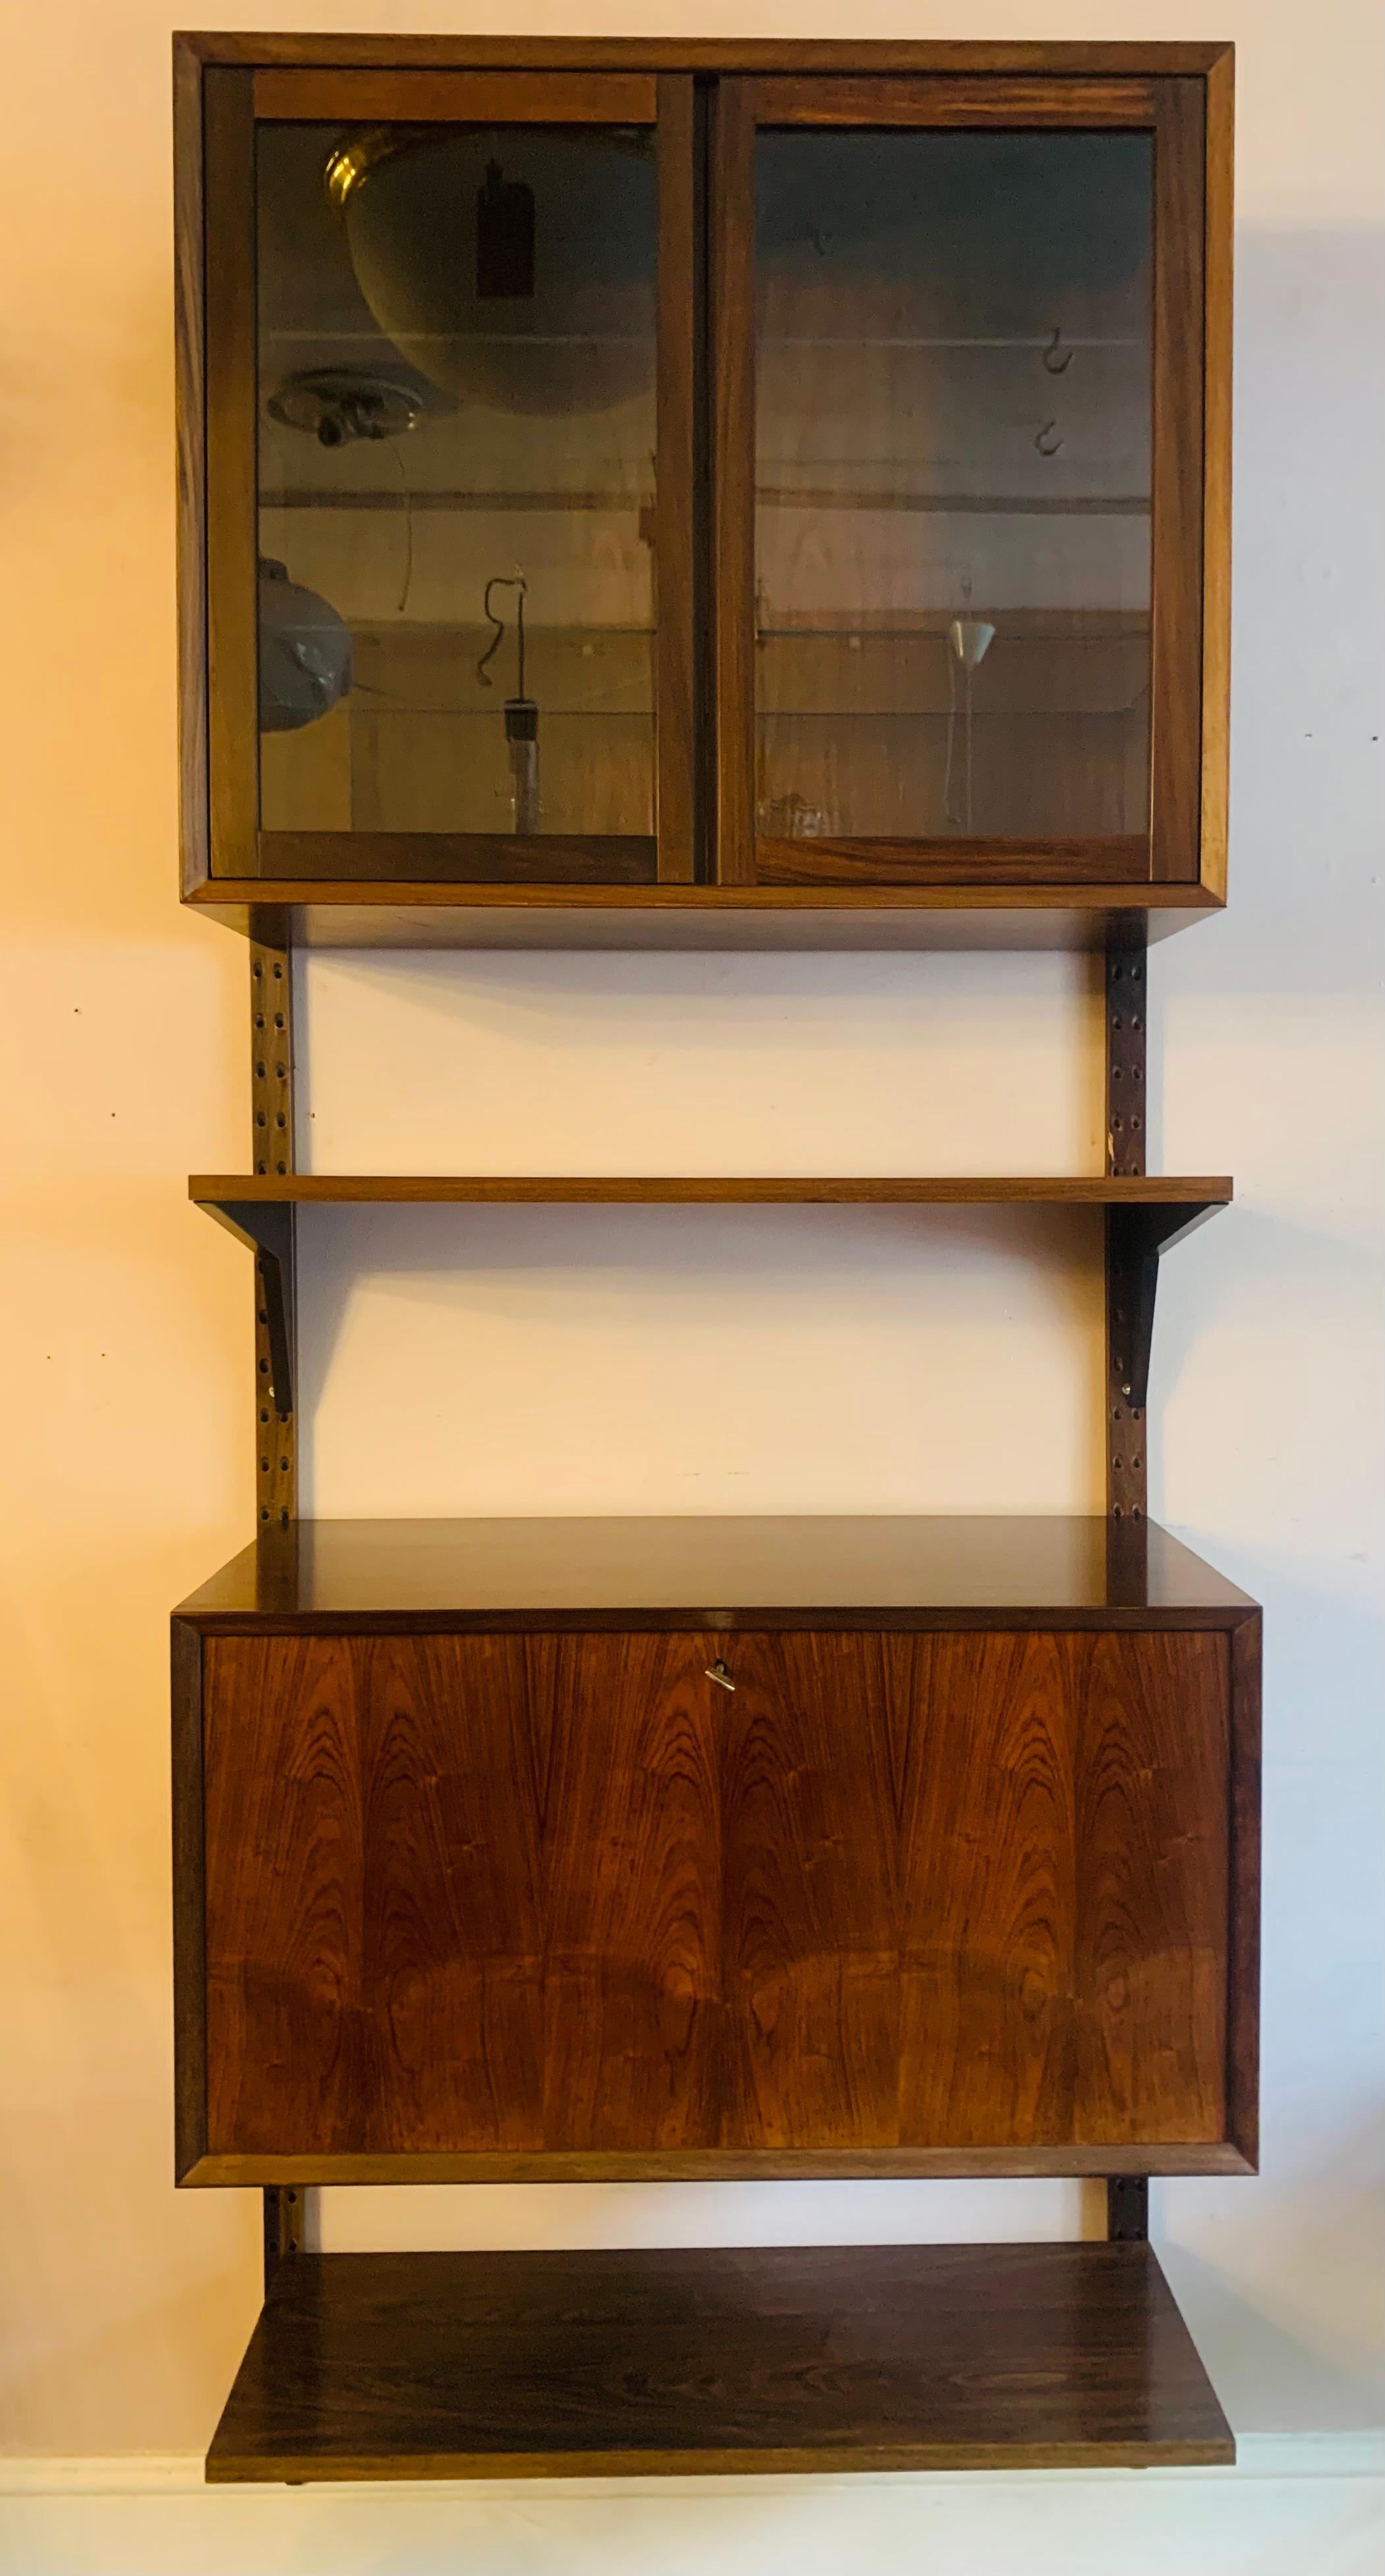 A well-sized, multi-functional Rosewood veneered, single wall-hung unit by Poul Cadovius for CADO. - Royal System Shelving Unit. 

The wall unit dates from the 1960s and is in very good condition considering its age. The unit consists of:

2 x